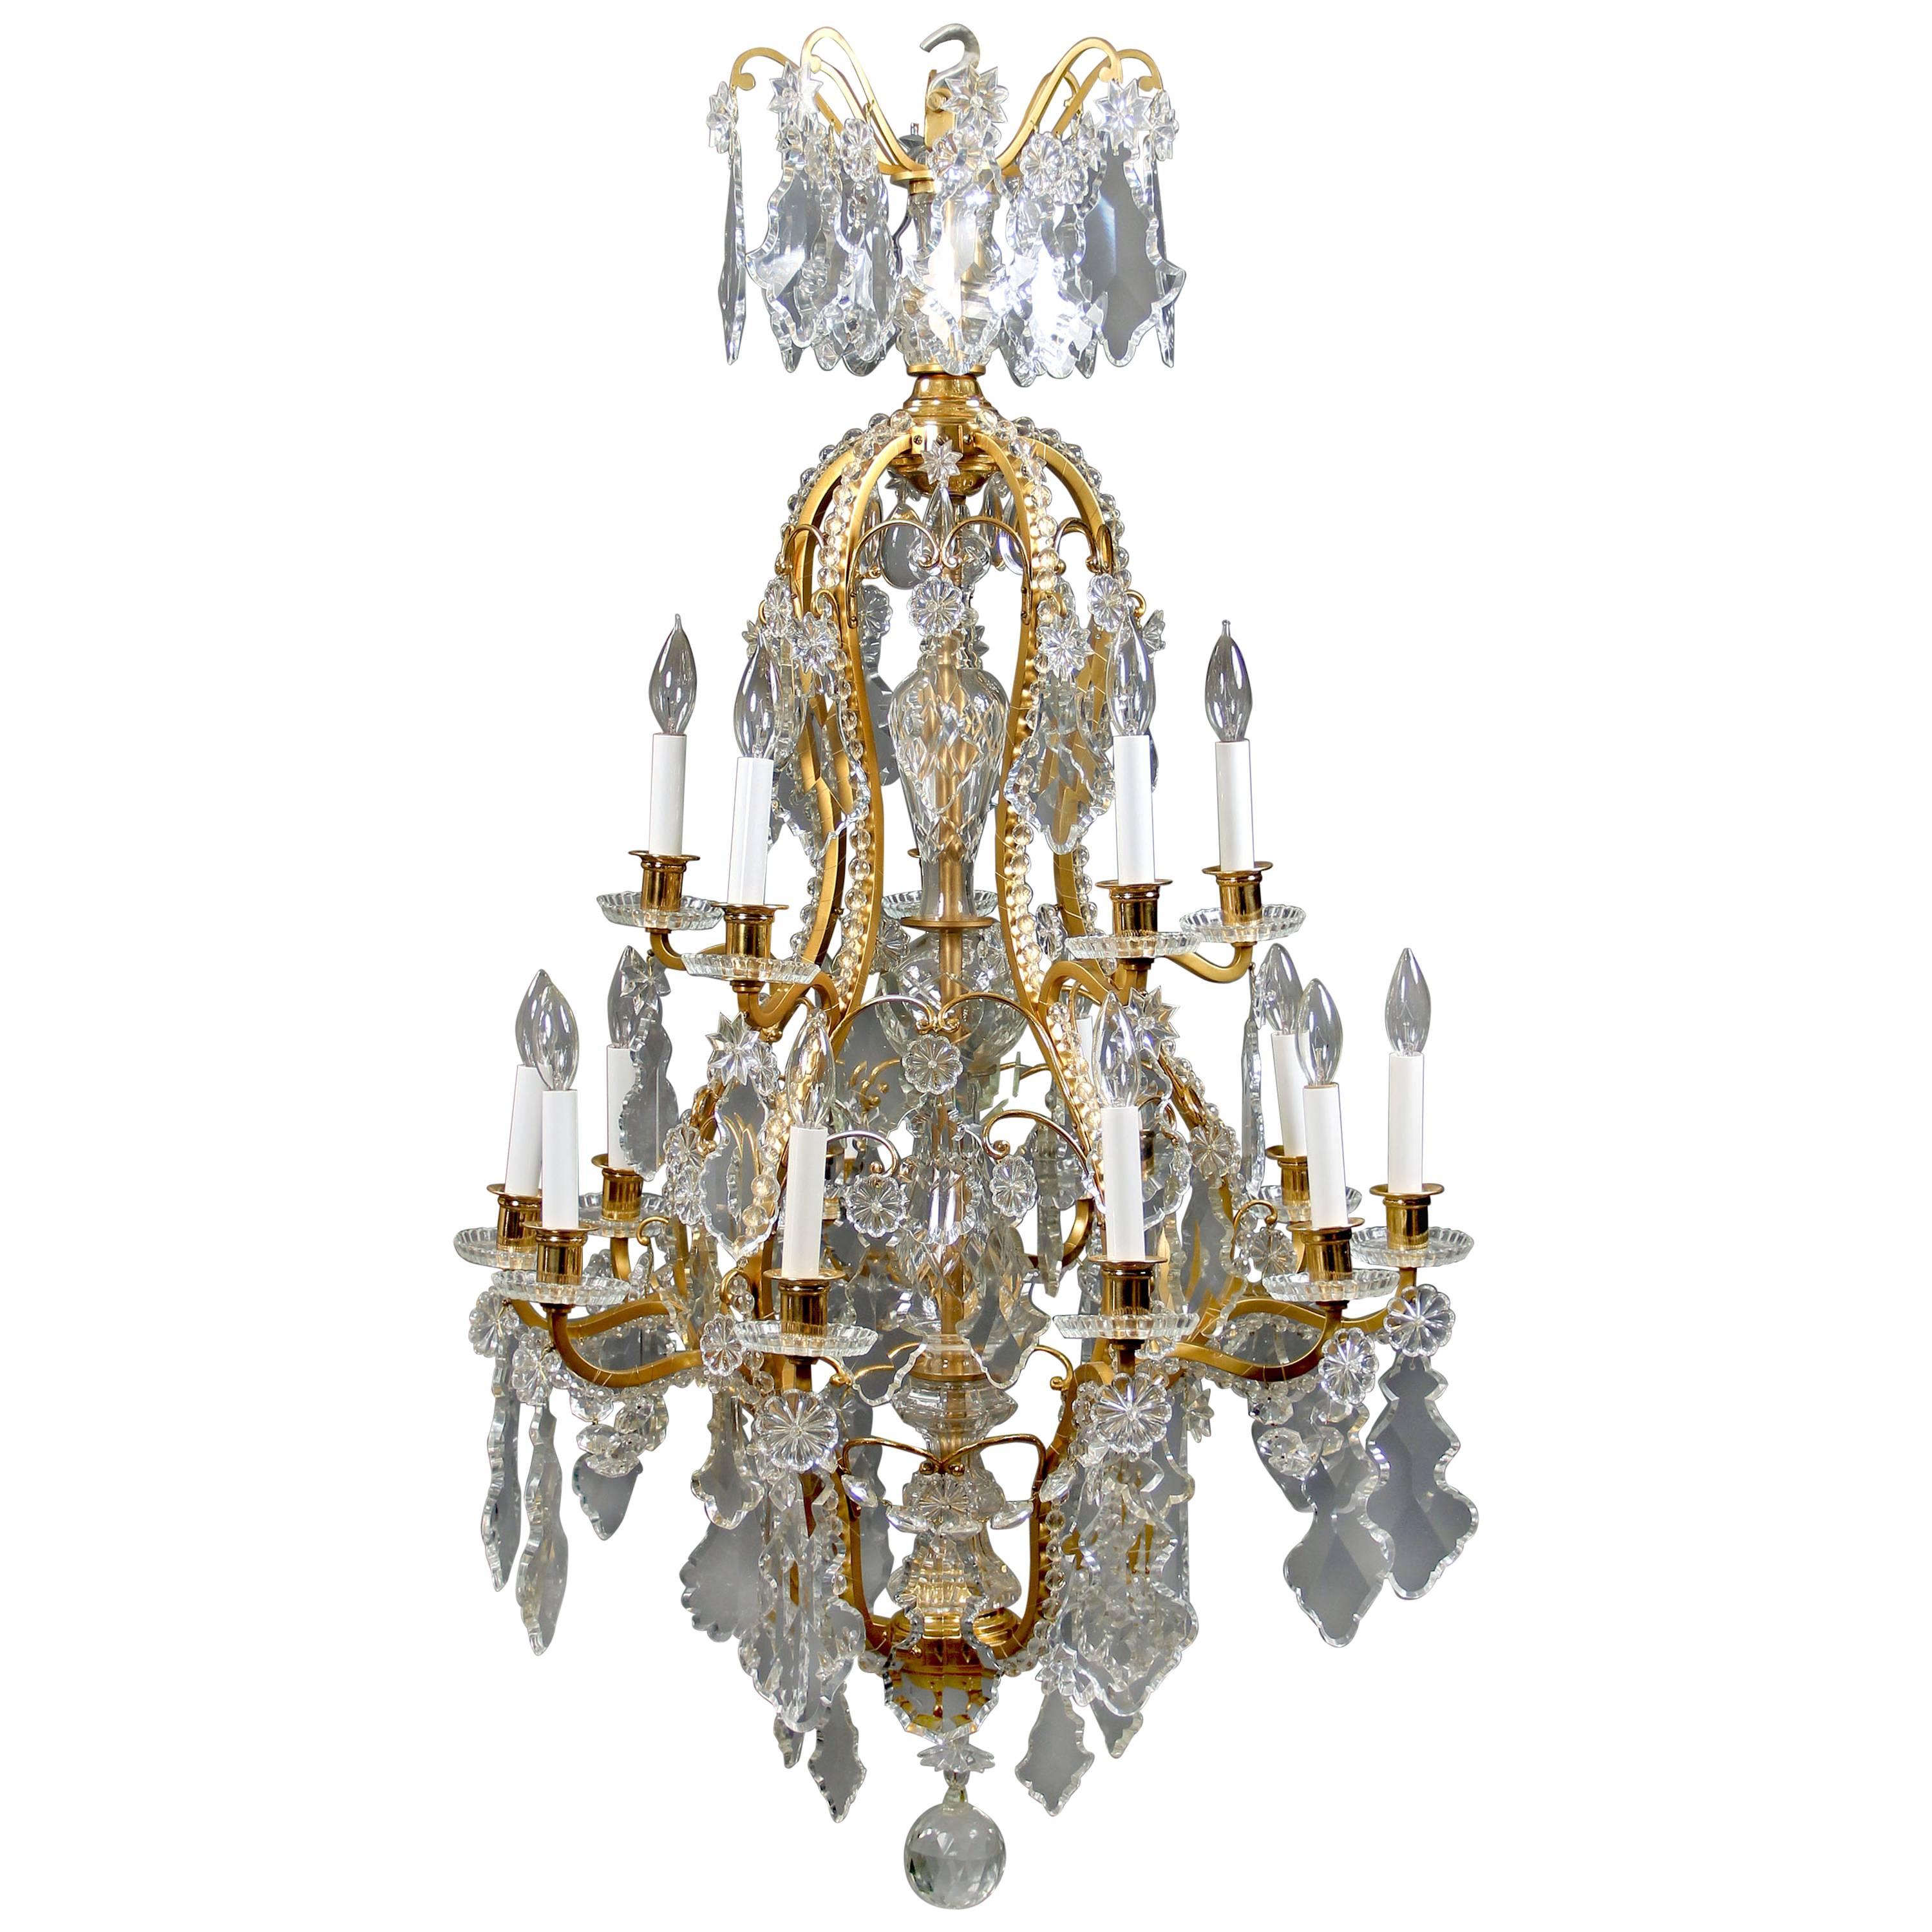  Late 19th Century Gilt Bronze and Baccarat Crystal Fifteen-Light Chandelier For Sale